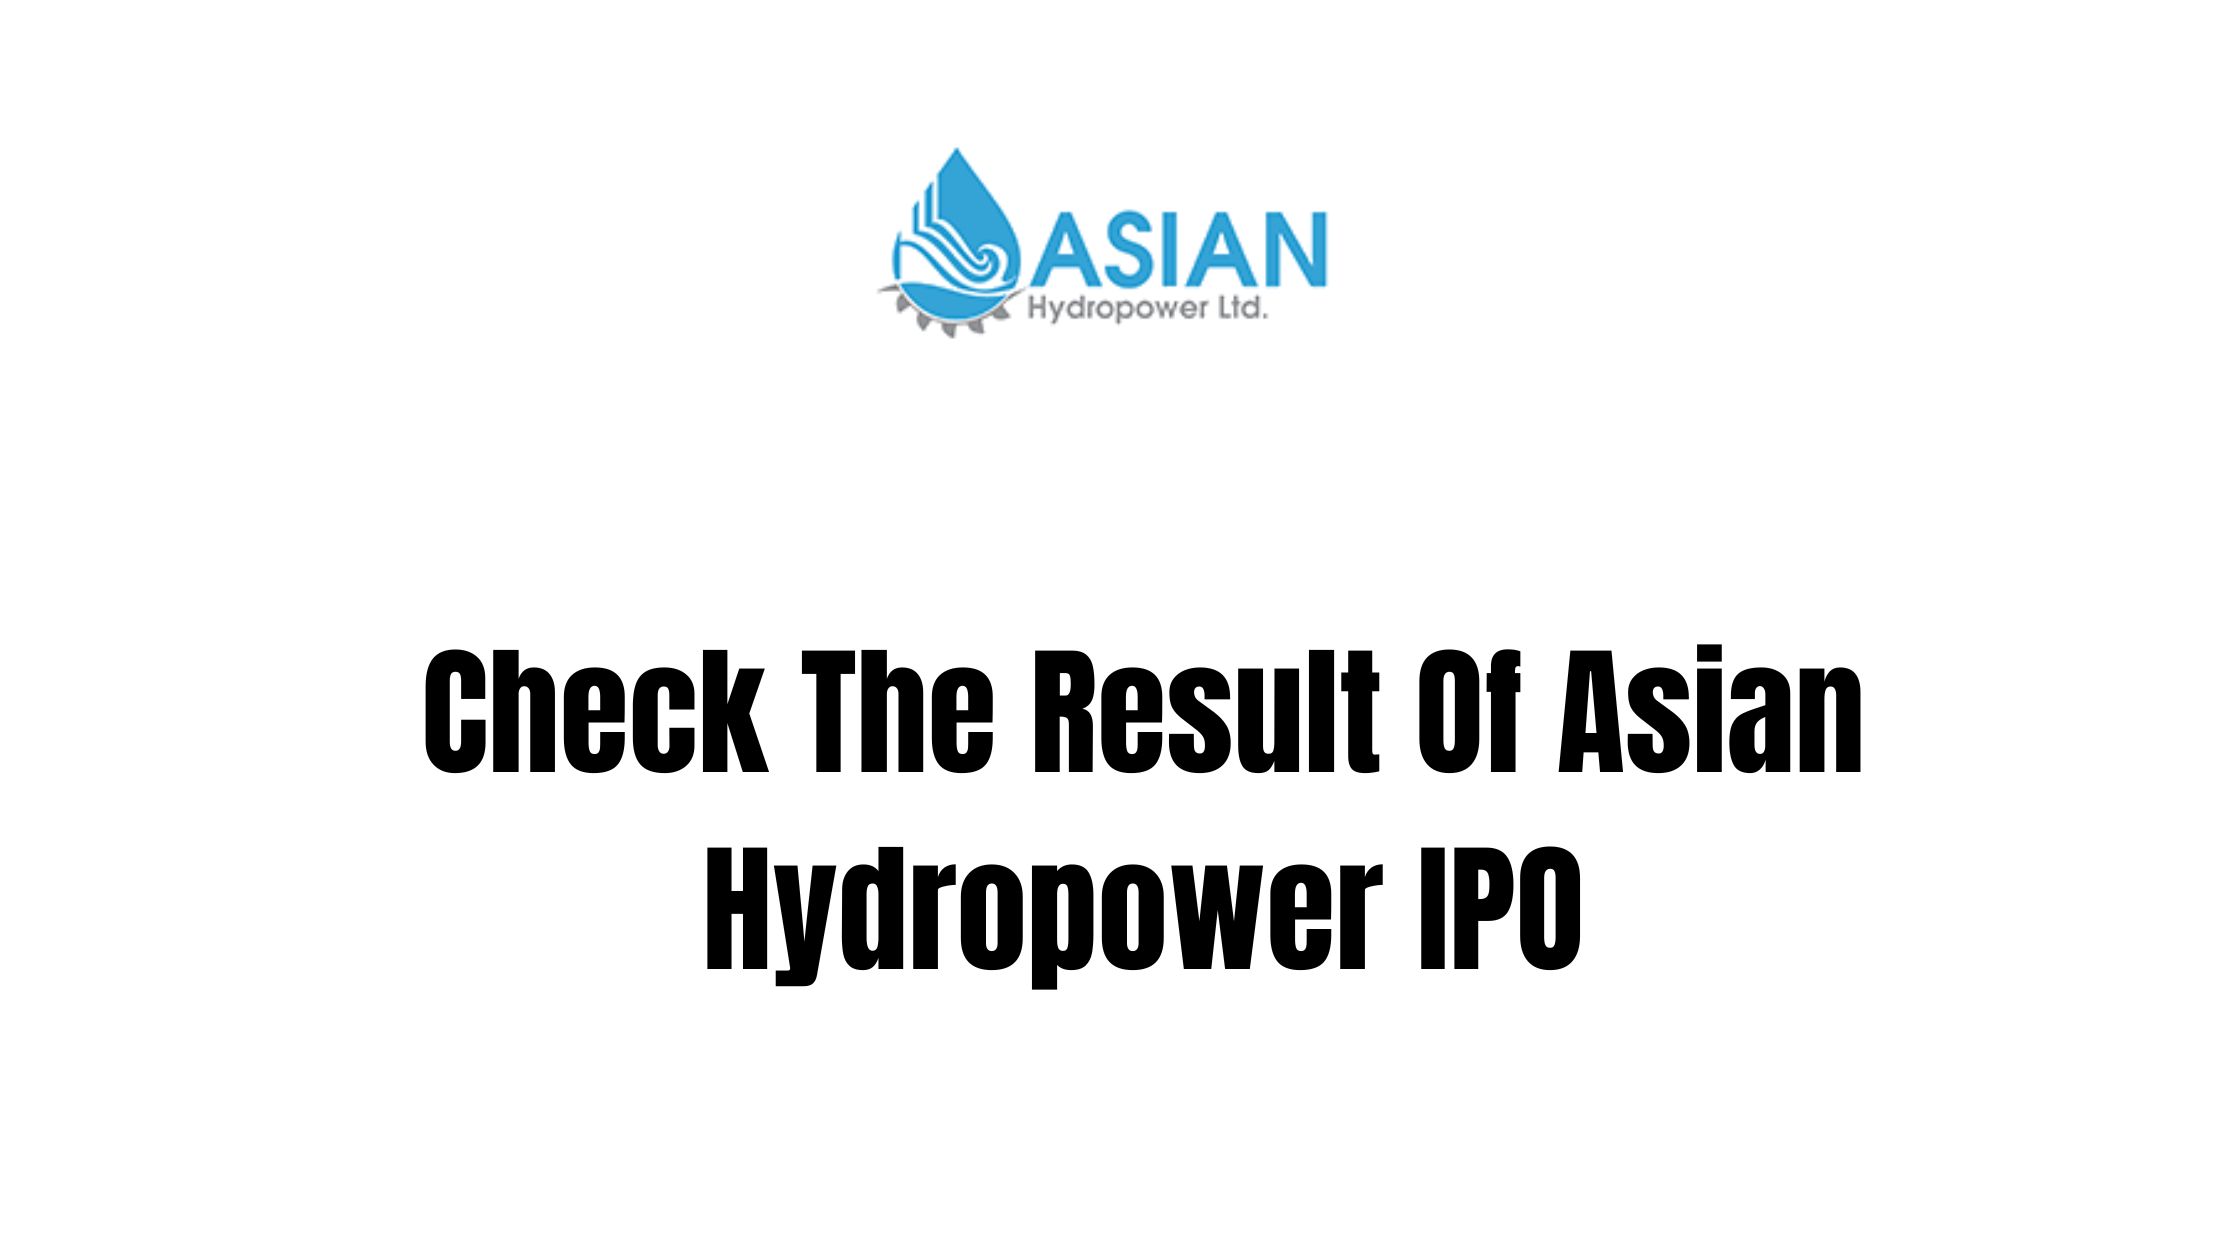 Check The Result Of Asian Hydropower IPO